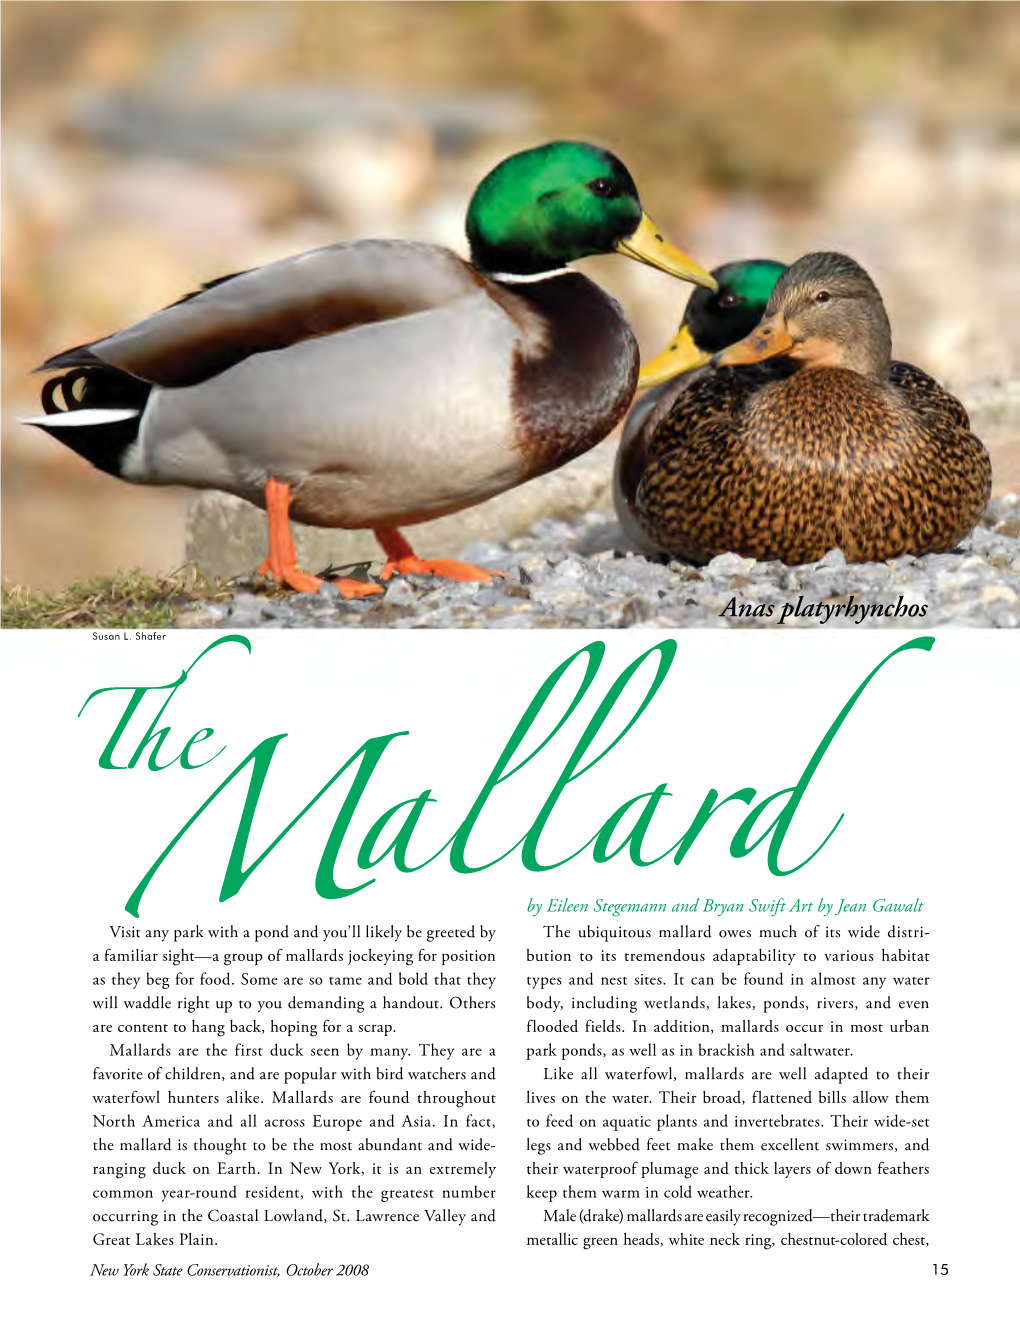 The Mallard Is Thought to Be the Most Abundant and Wide- Legs and Webbed Feet Make Them Excellent Swimmers, and Ranging Duck on Earth